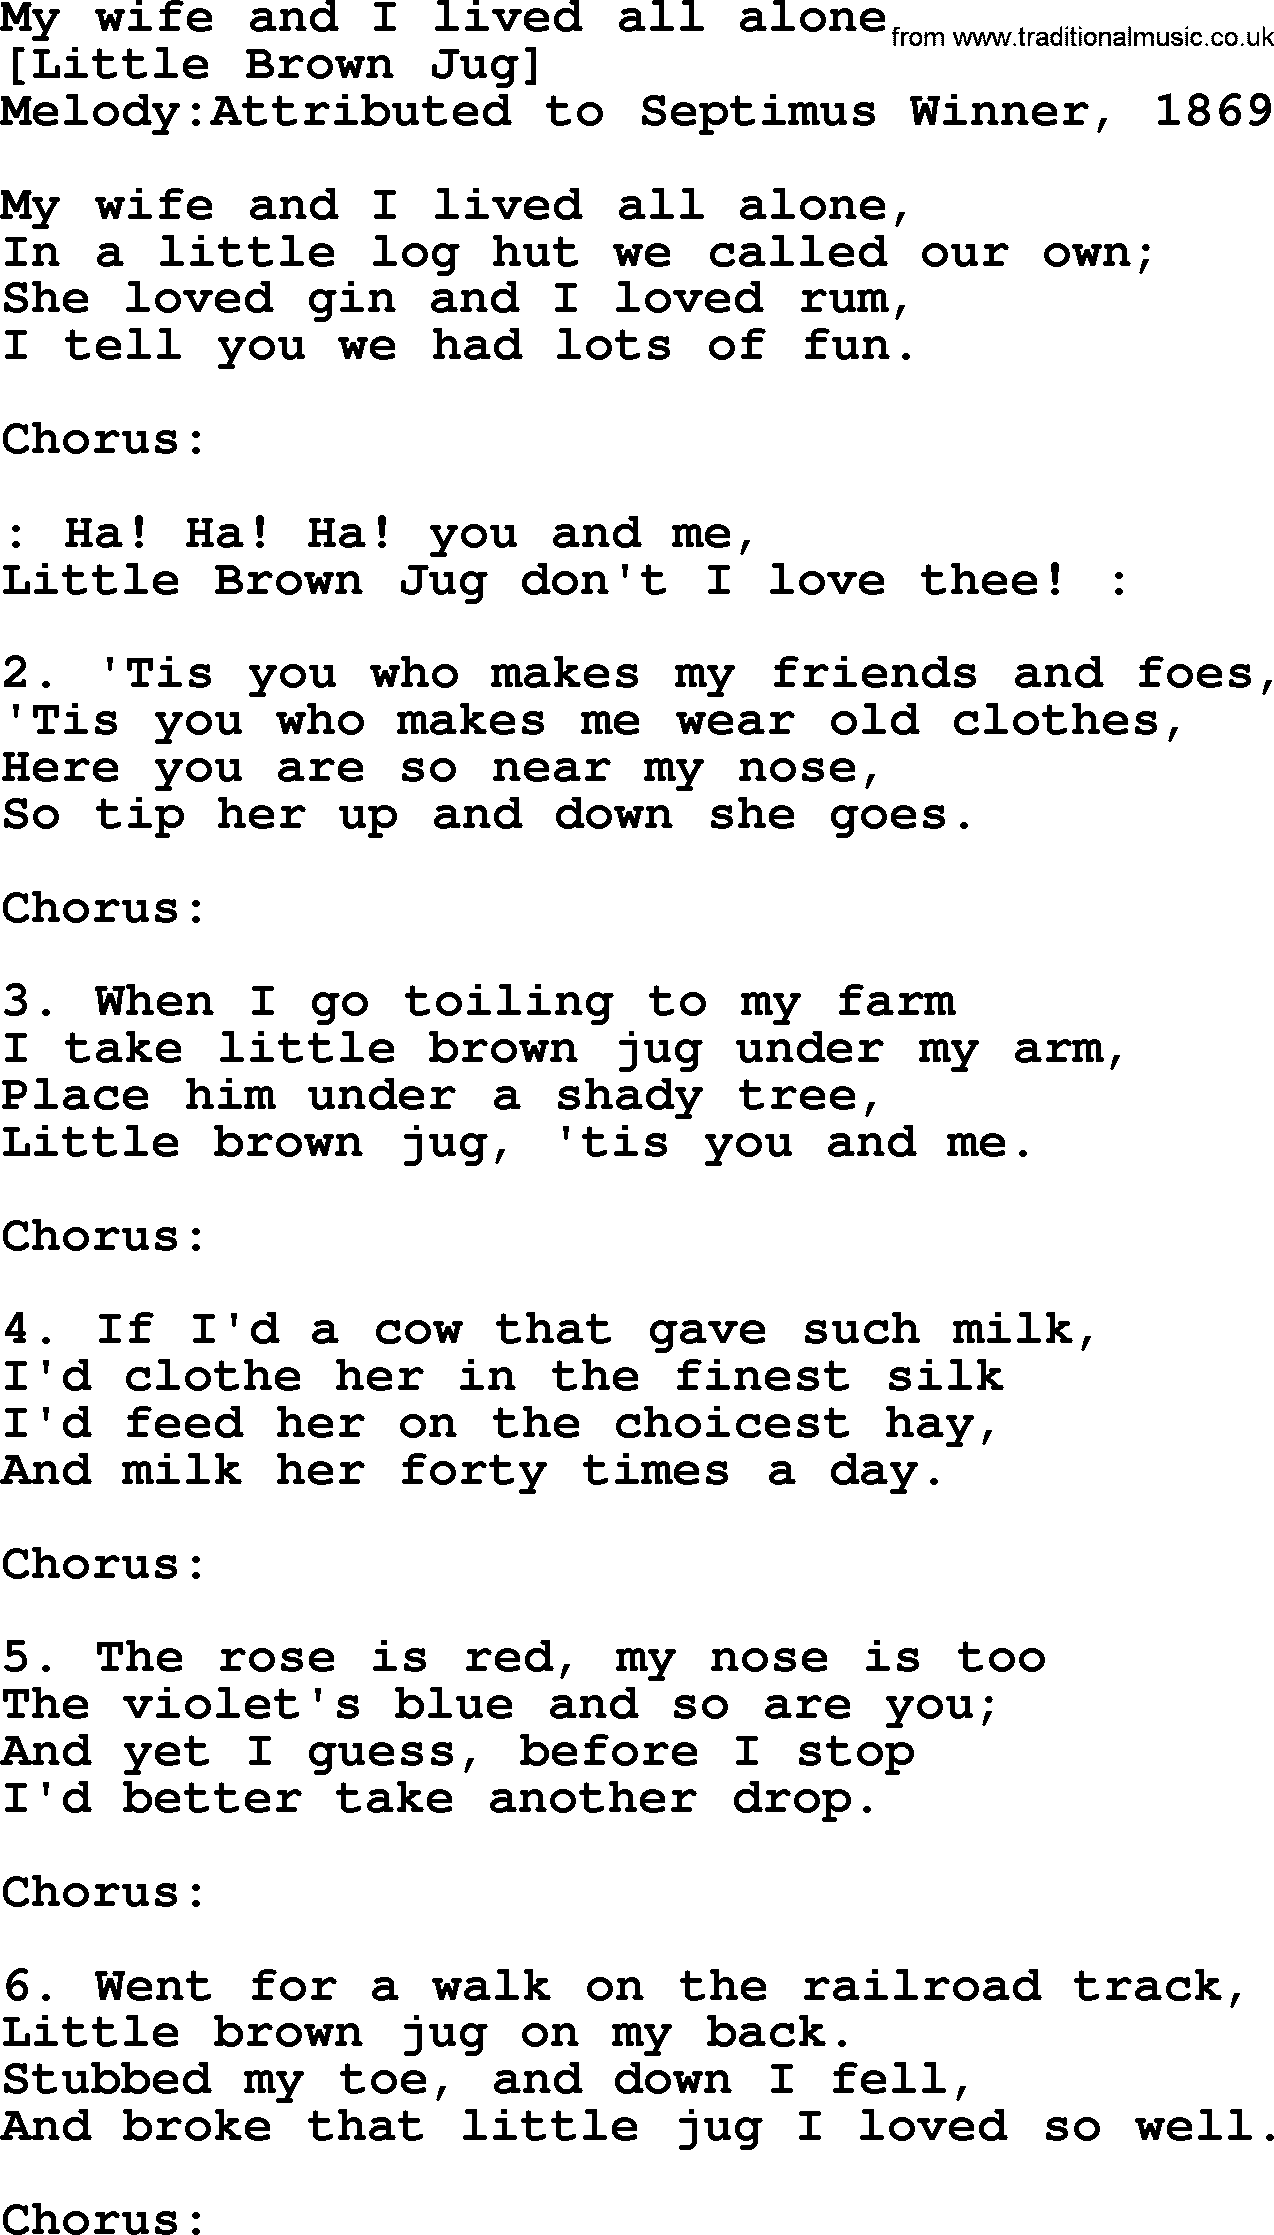 Old American Song: My Wife And I Lived All Alone, lyrics